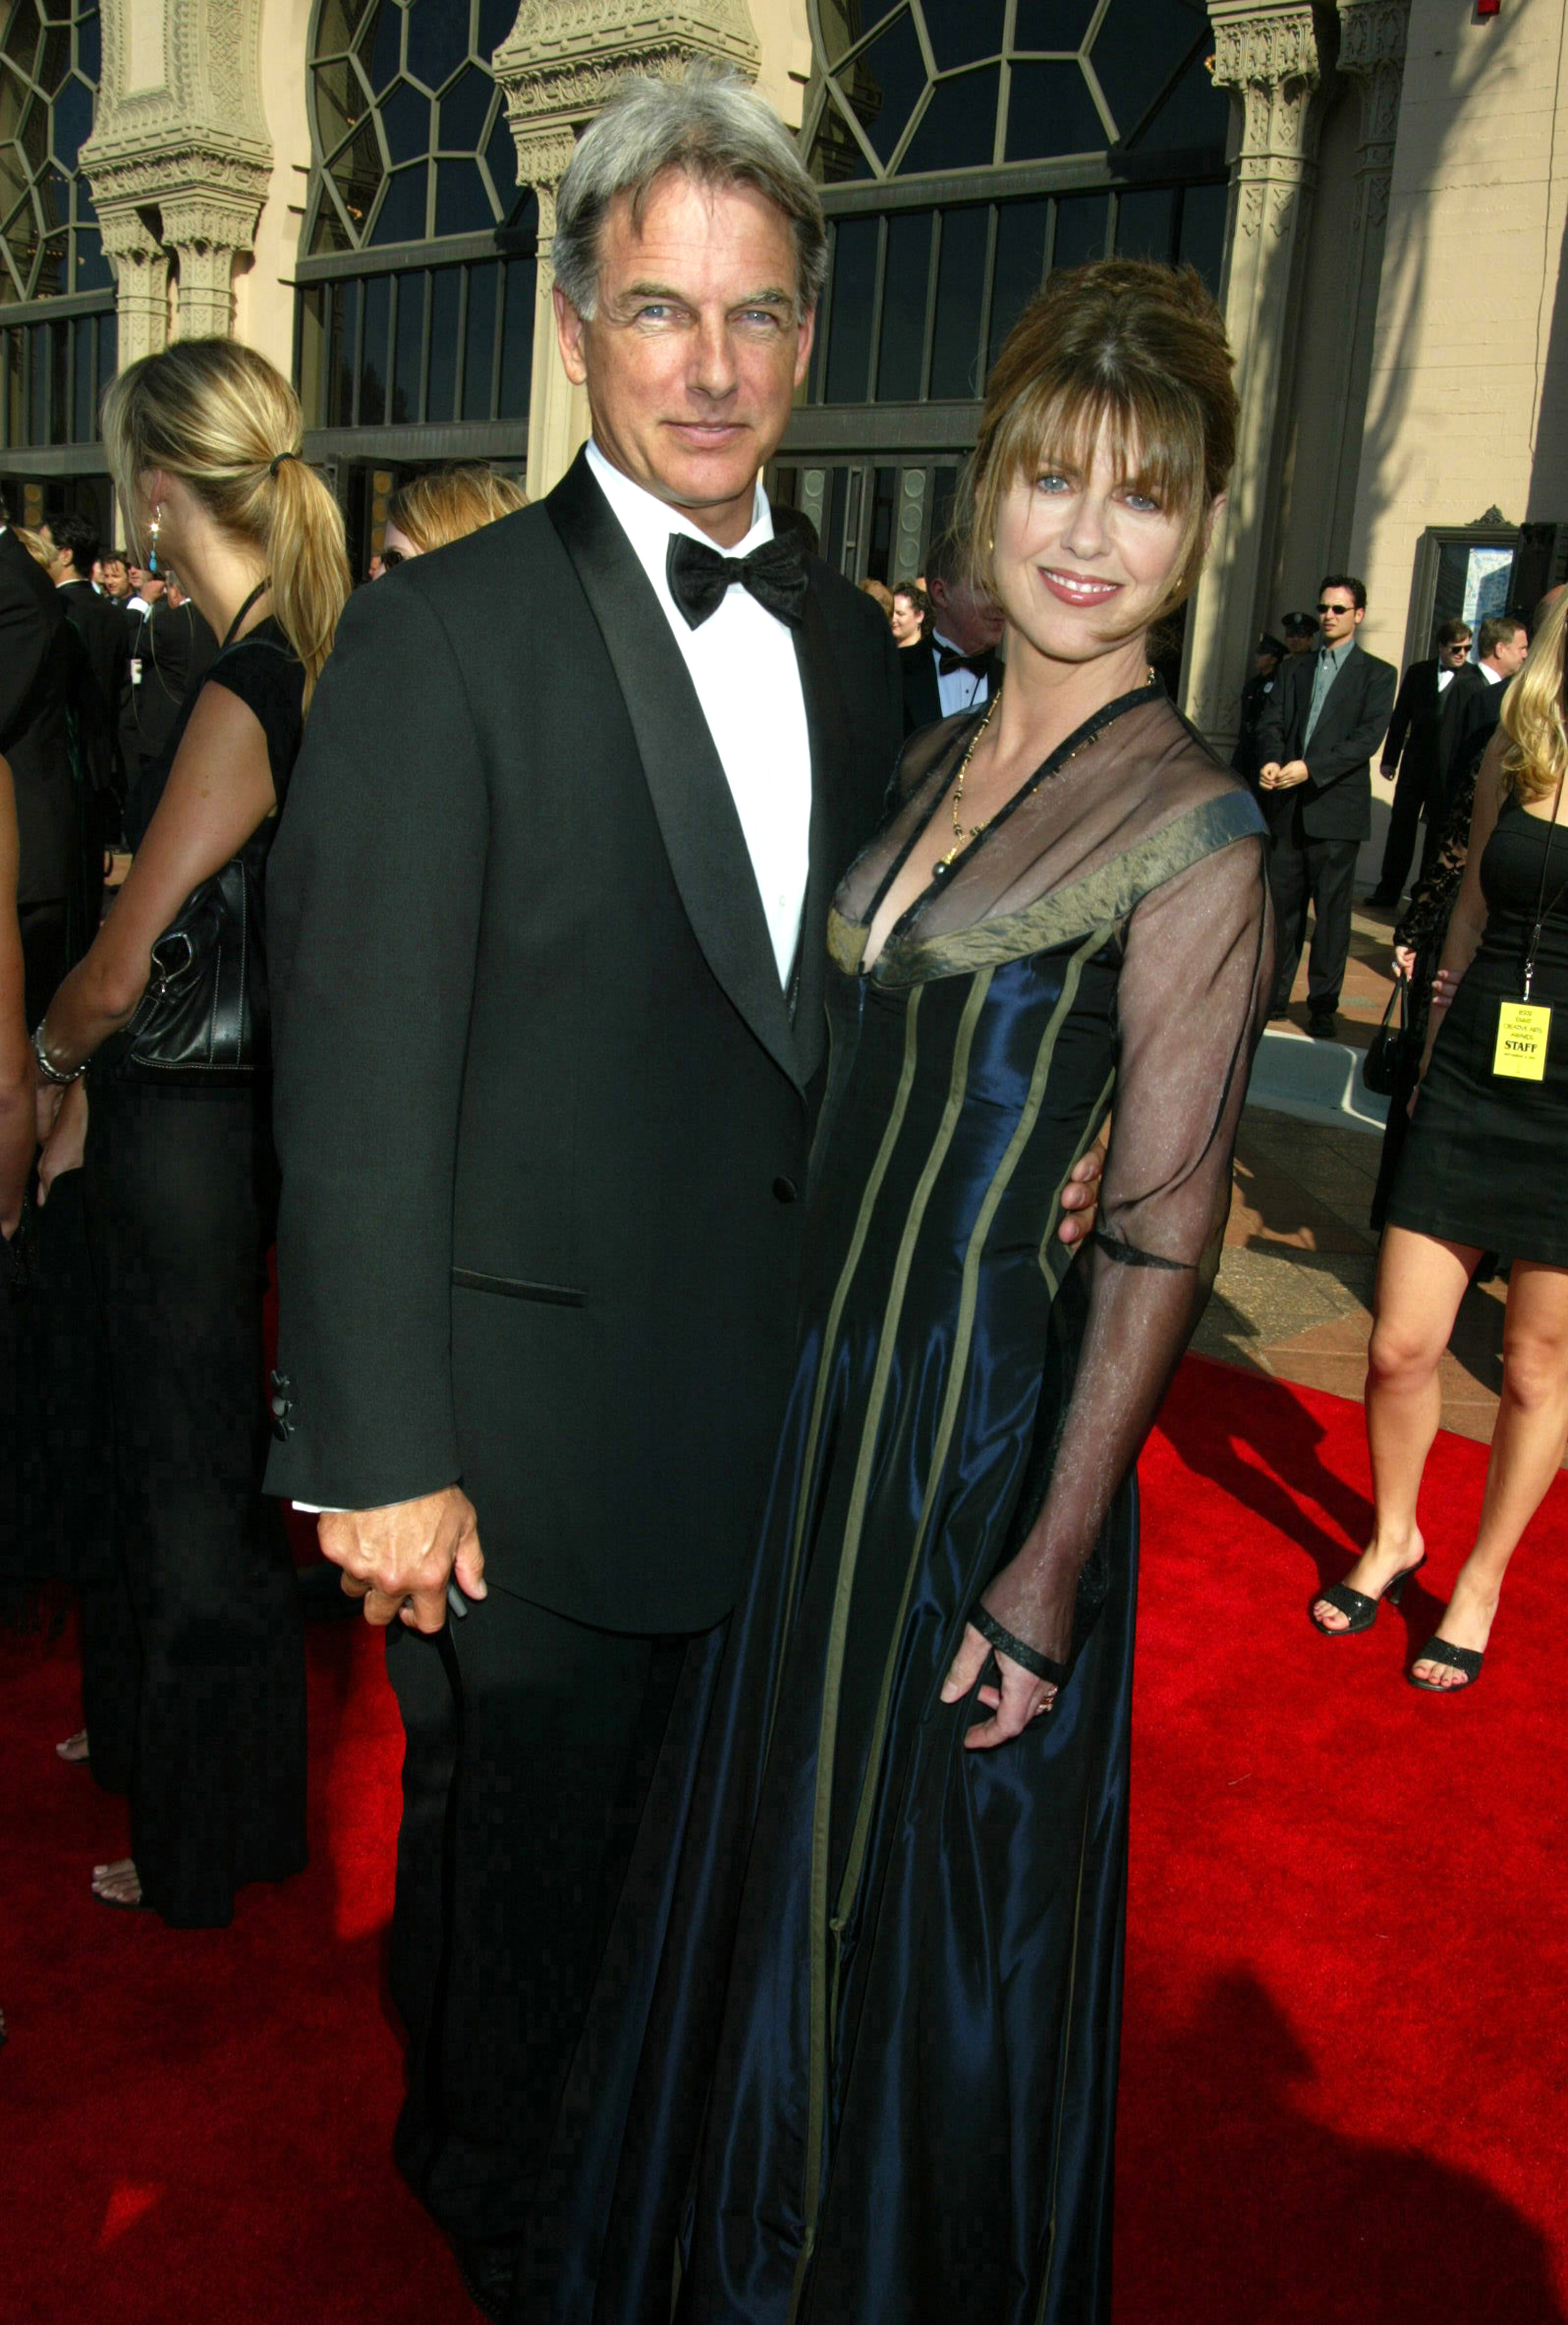 Mark Harmon & Pam Dawber during 2002 Creative Arts Emmy Awards - Arrivals at Shrine Auditorium in Los Angeles, California, United States. | Source: Getty Images